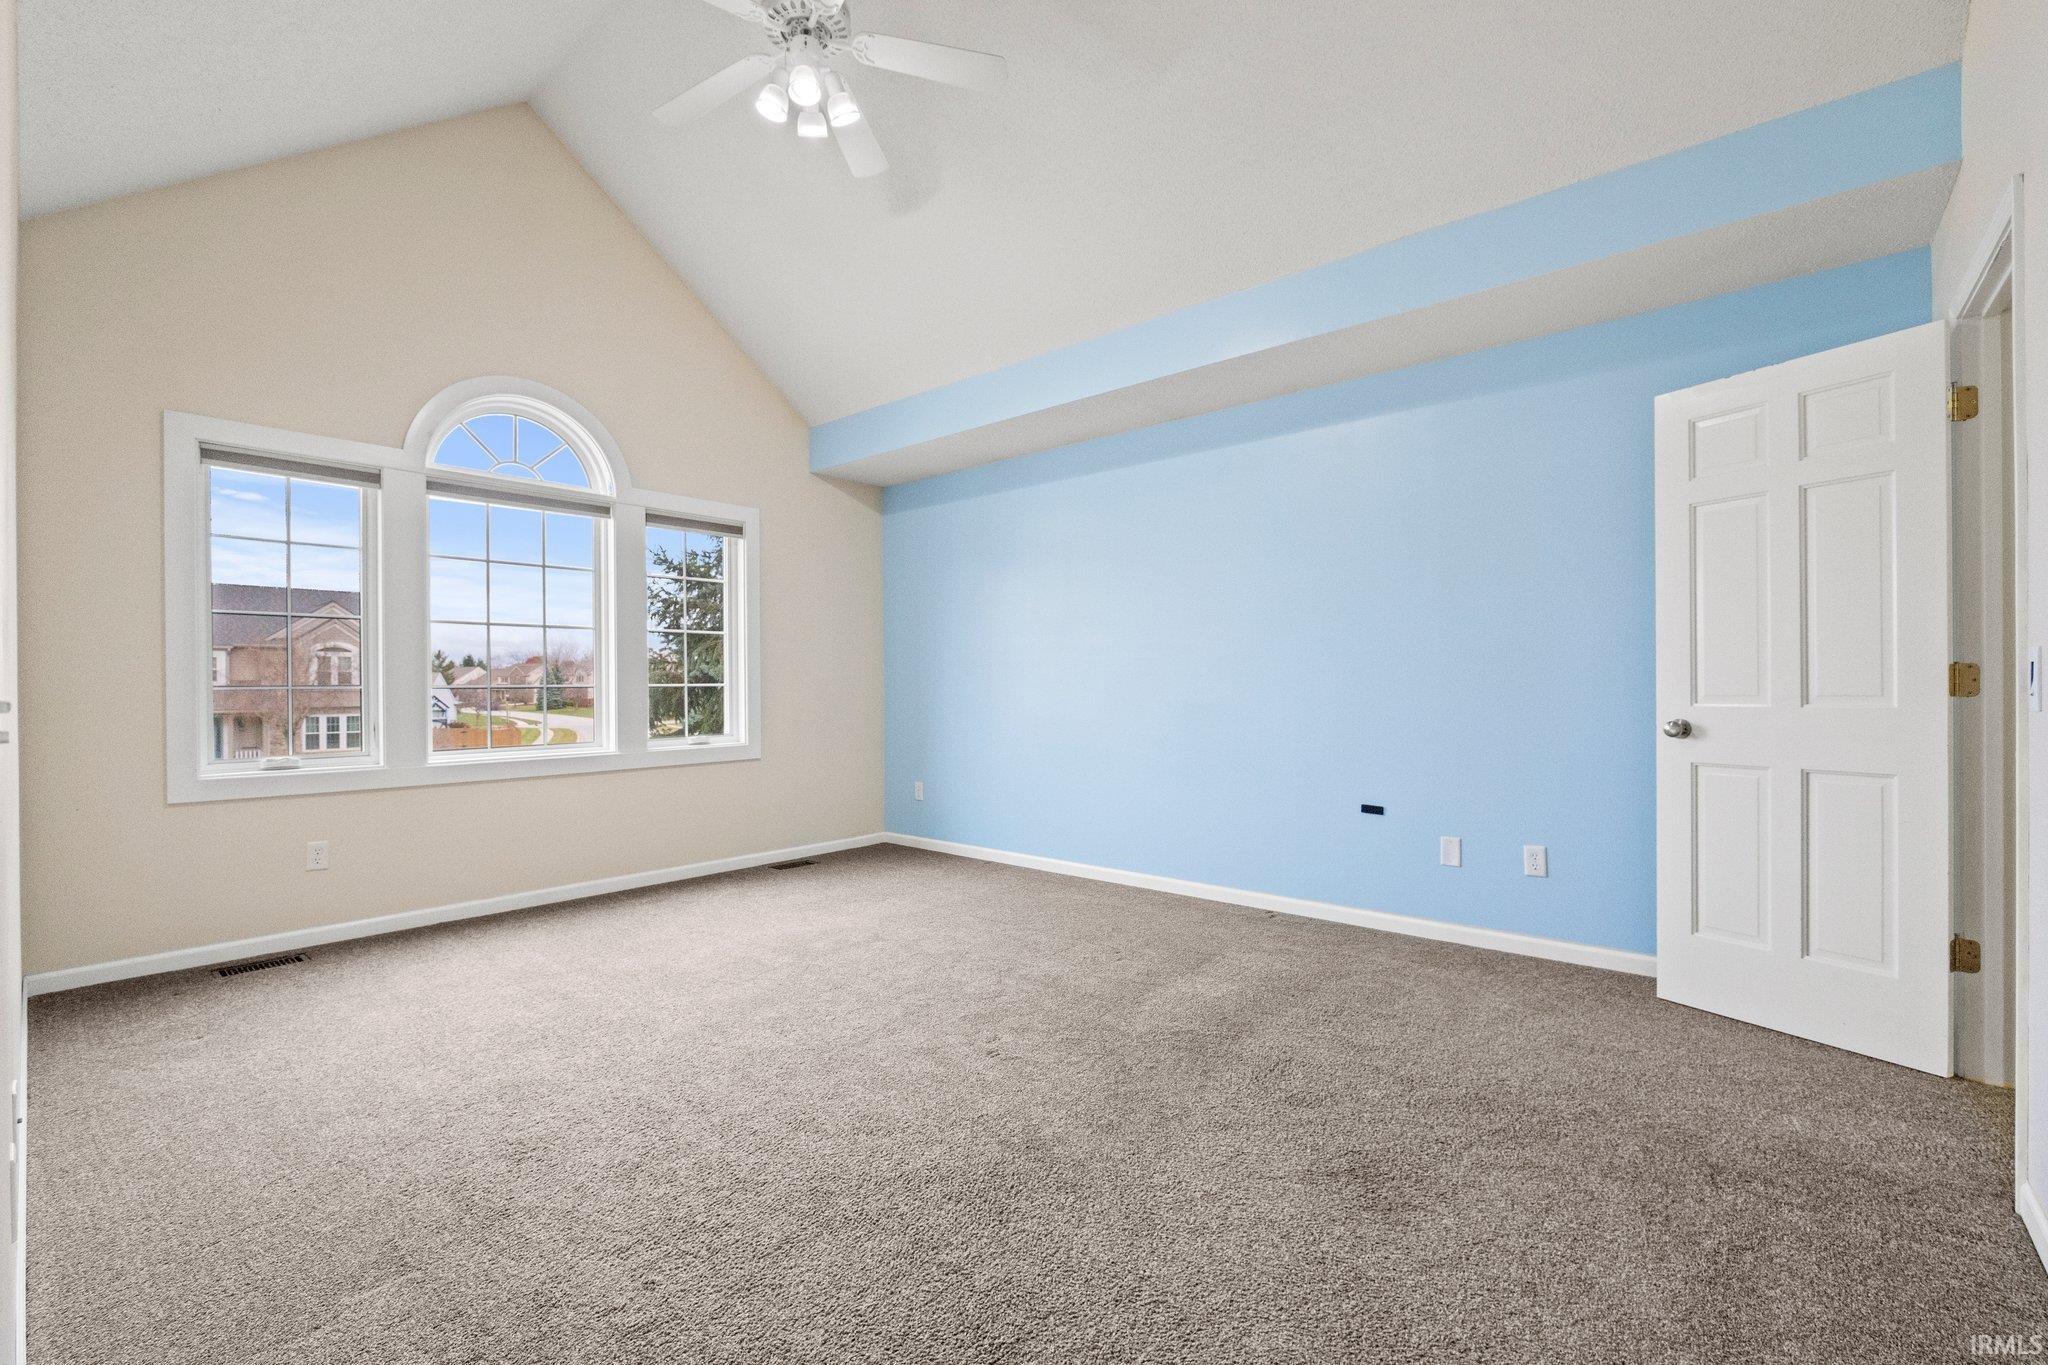 Photo 18 of 14903 Sea Holly Court